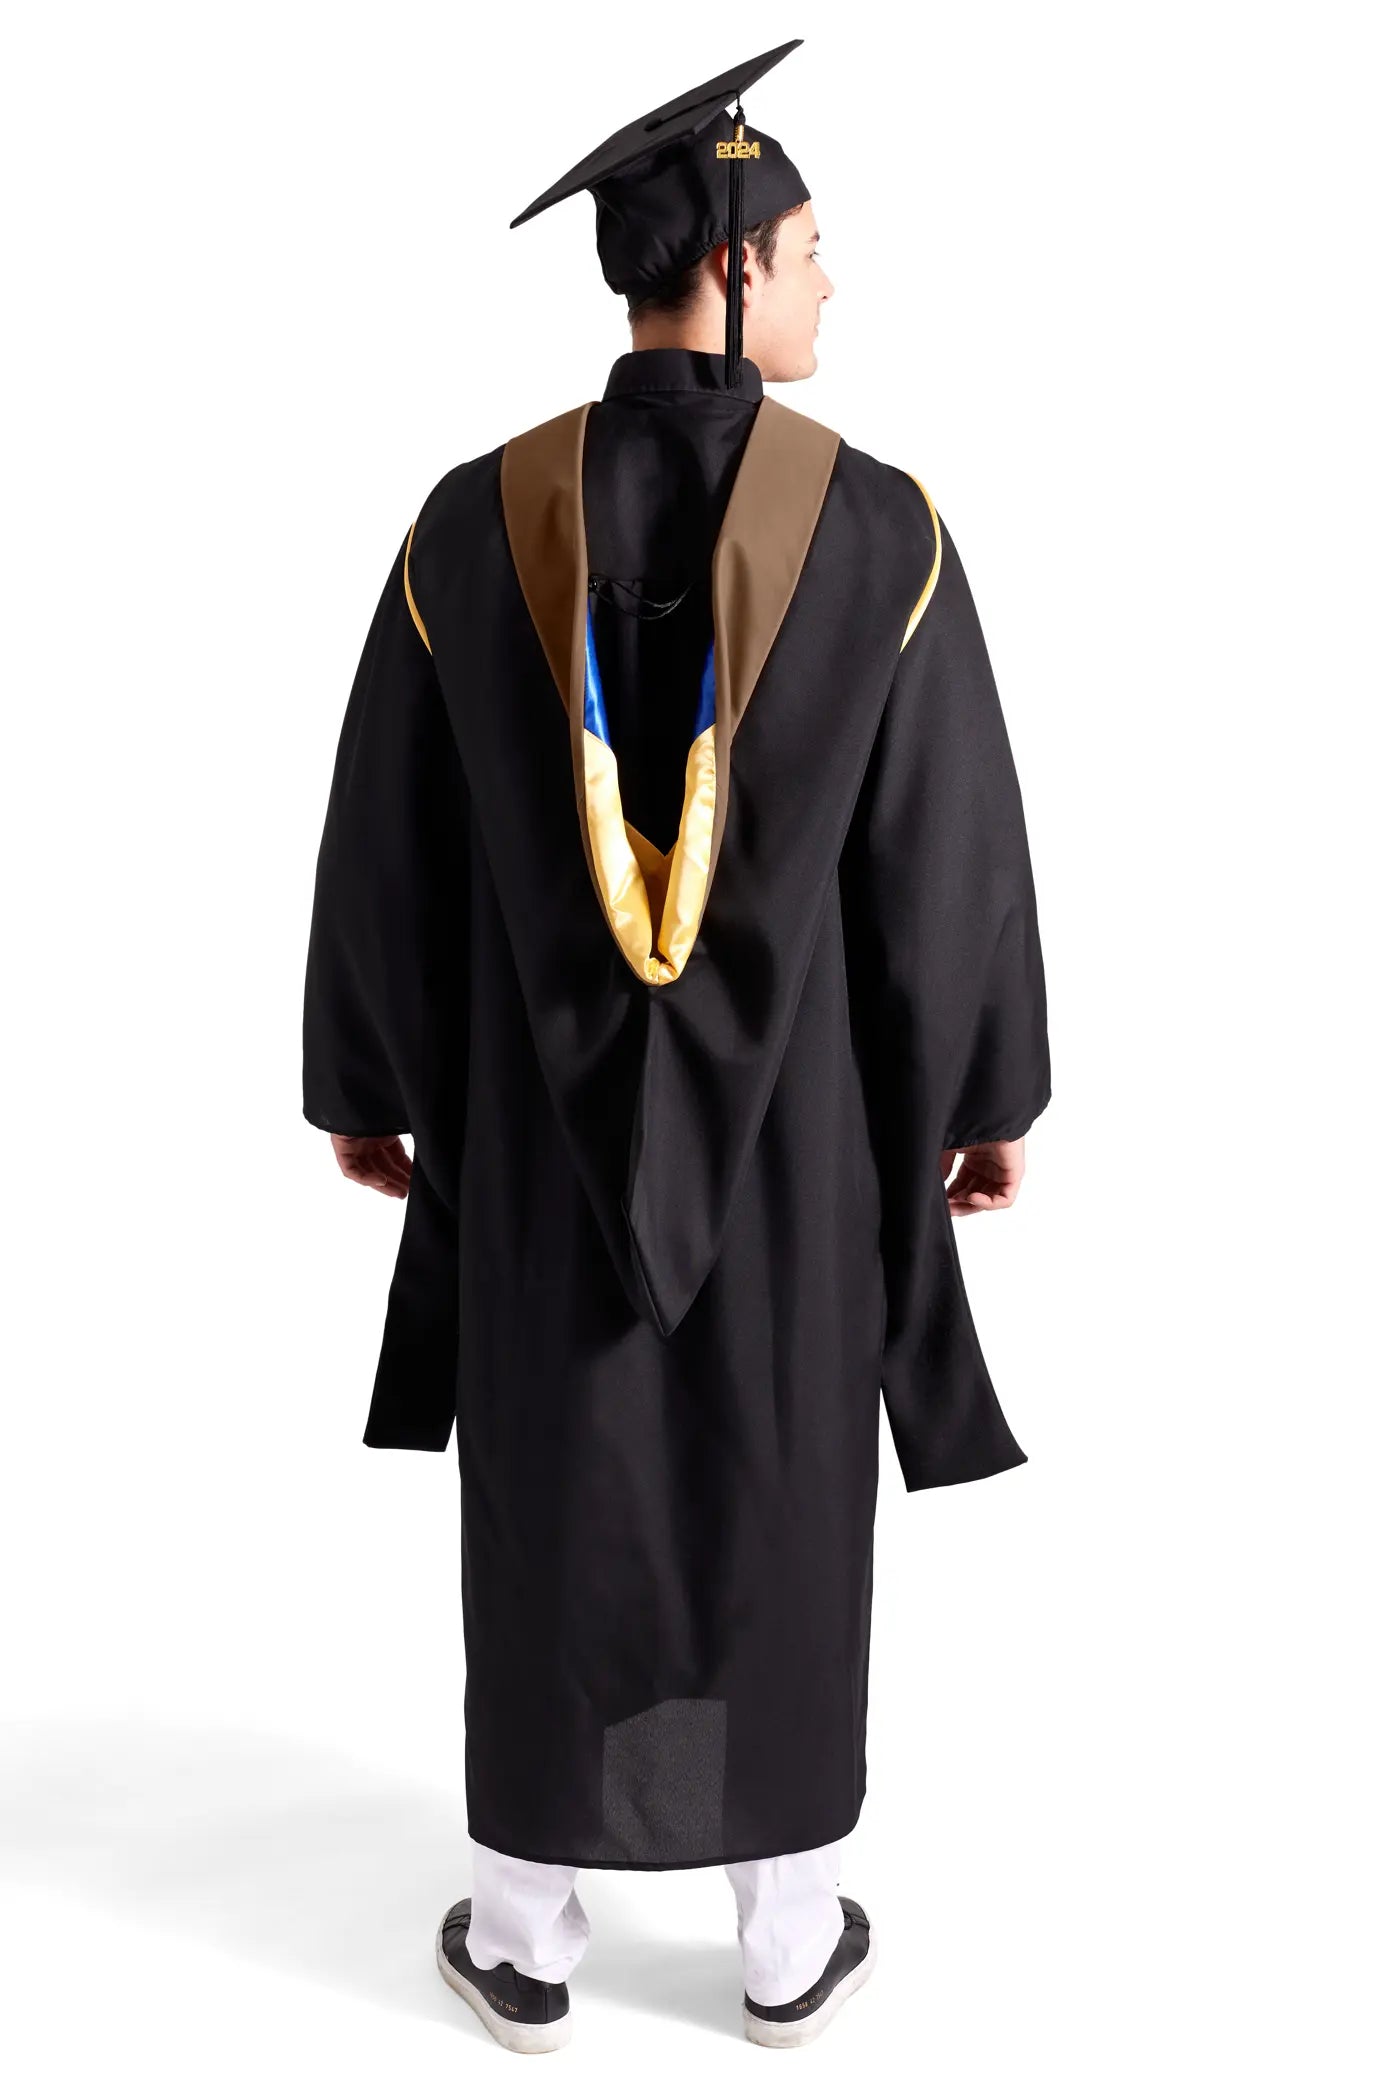 HAPPY TASSEL | UC Riverside Master's Regalia Set, include master's gown with pockets, mortarboard cap, brown hood, and tassel with year charm. | Creative Writing, Dance, Studio Art, & Theater Degrees